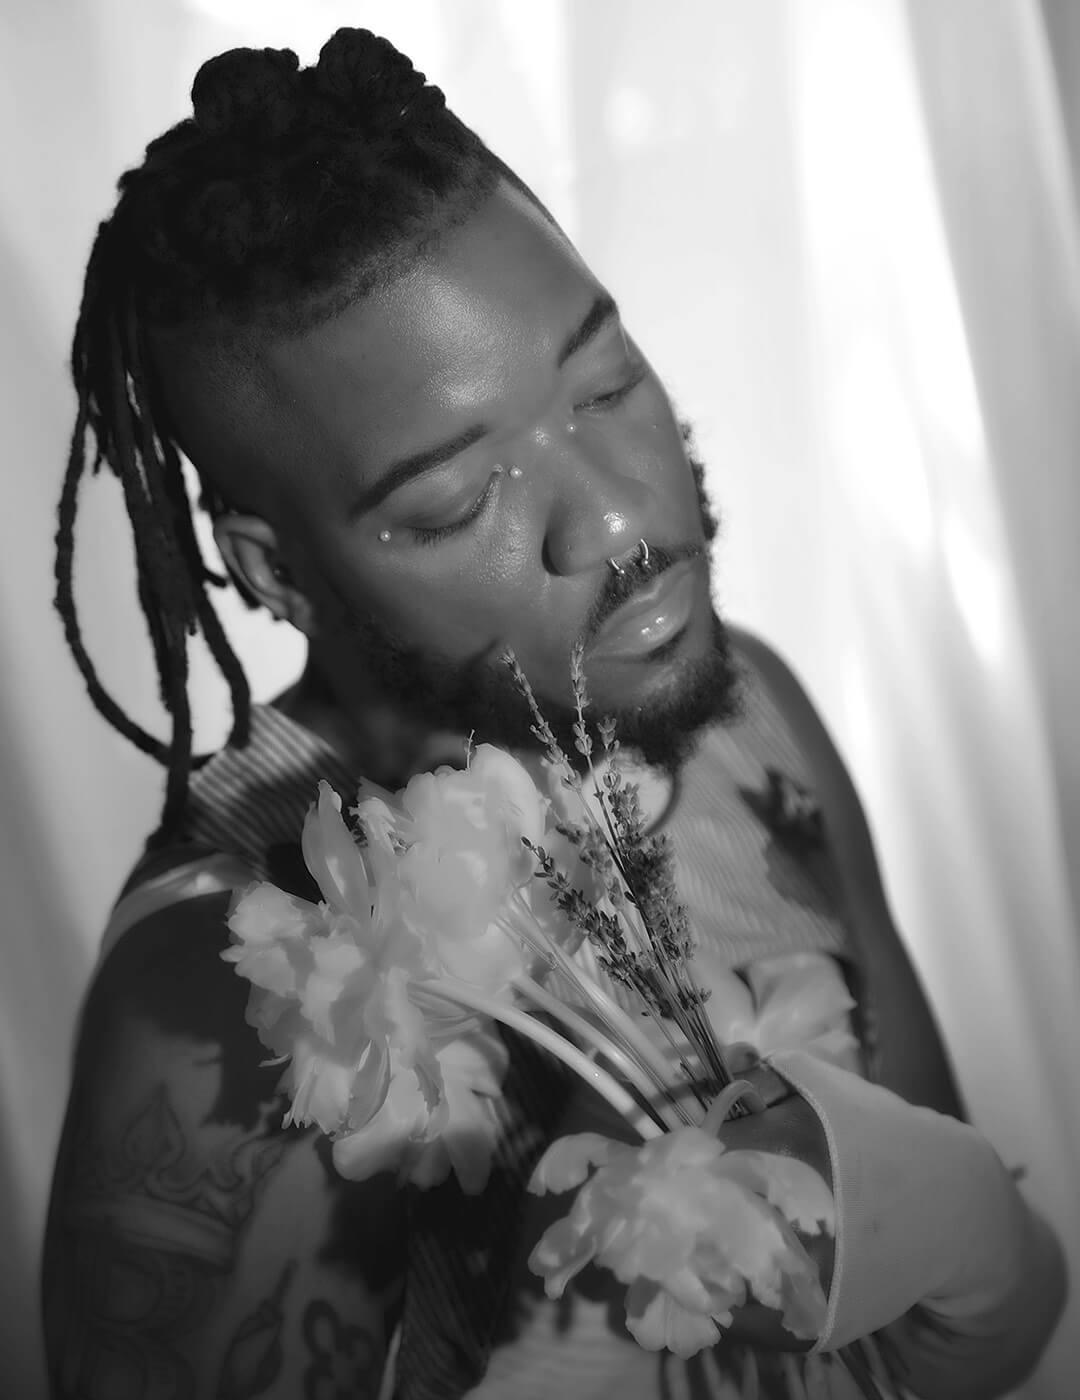 Black and white portrait of Bryce Anthony posing and holding a bouquet of flowers